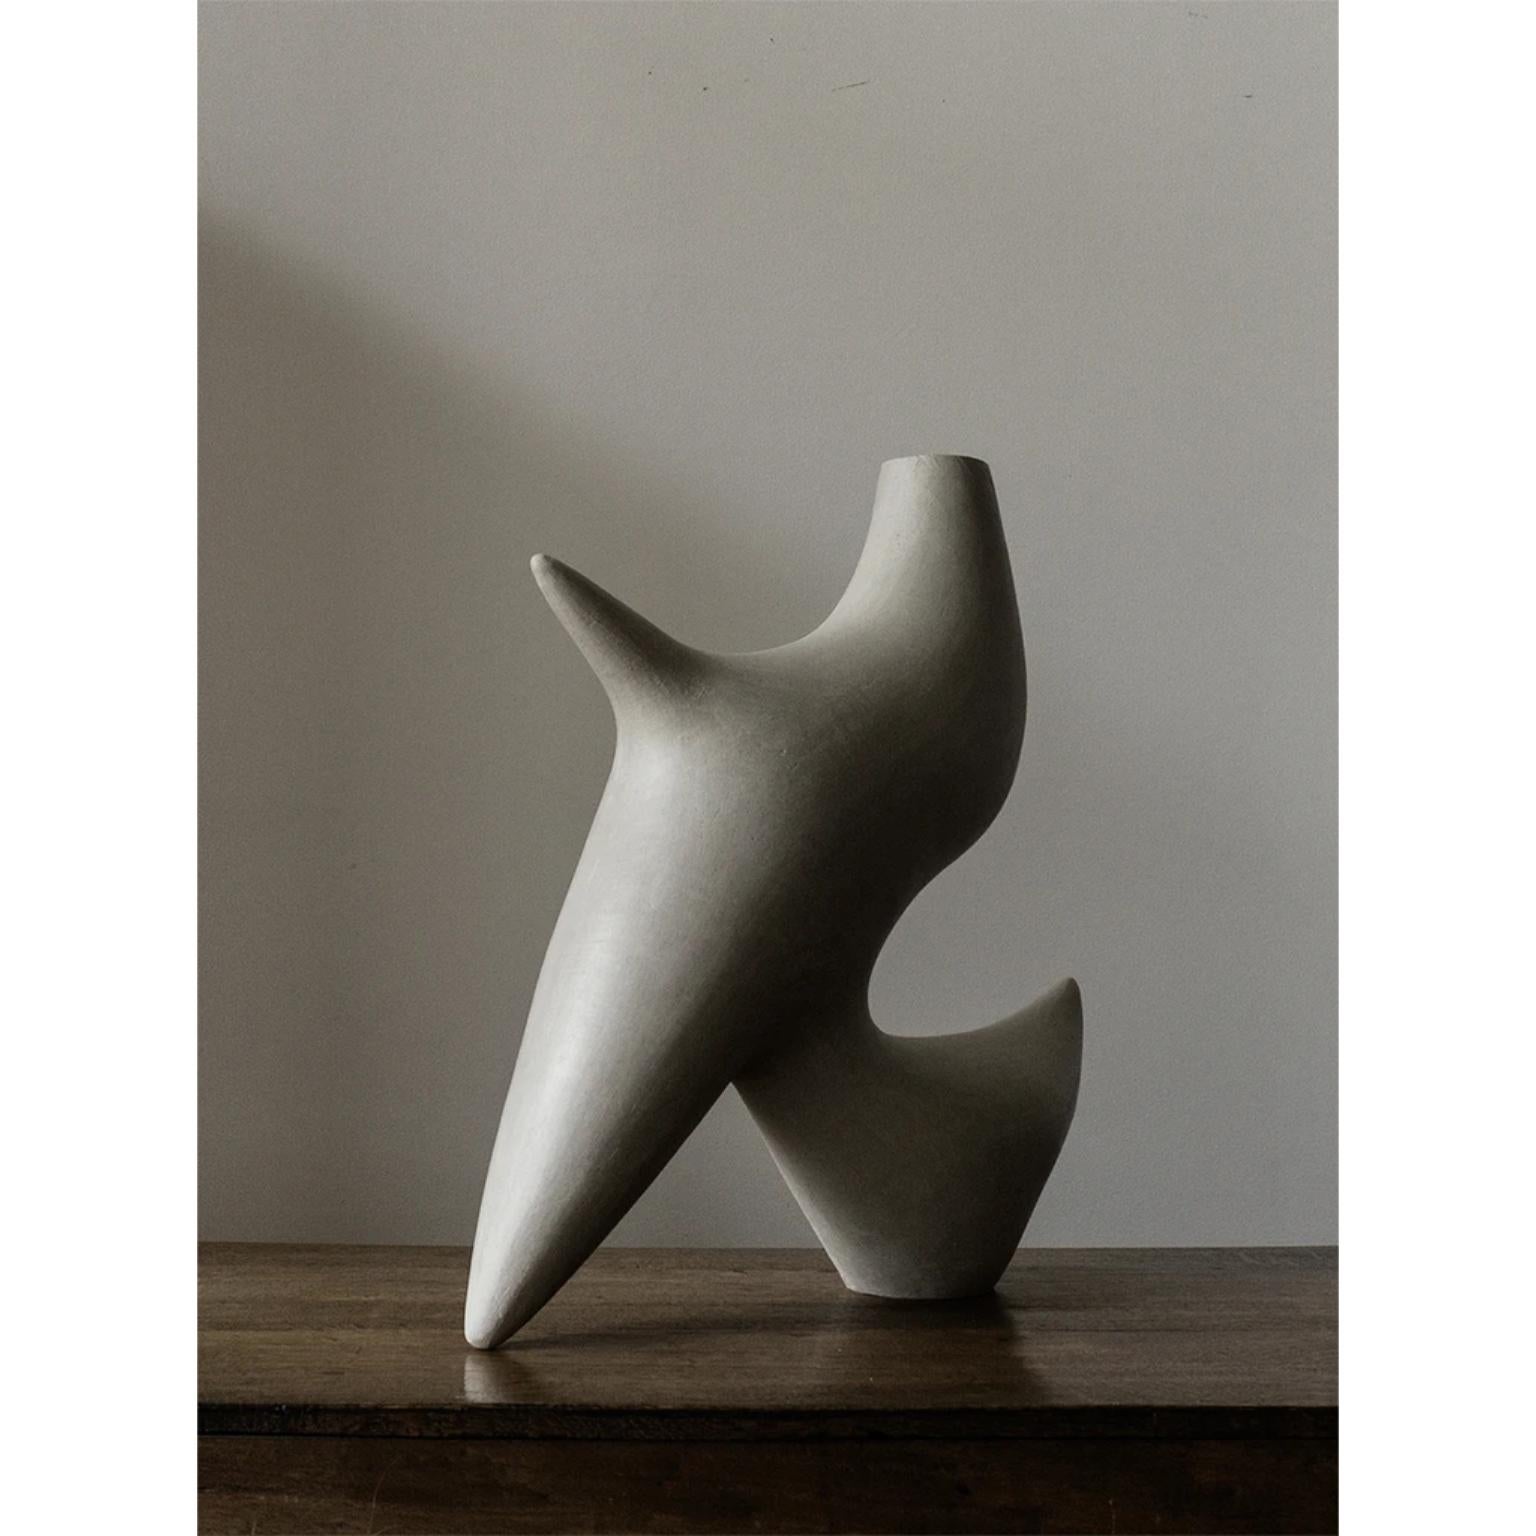 Dove vase by Cosmin Florea
Unique piece
Dimensions: W 40 x D 15 x H 45 cm
Materials: Stoneware

Inspired by my love for pristine nature, this sculptural vase channels the shape of a dove.
Handcrafted in white stoneware, the Dove vase can be